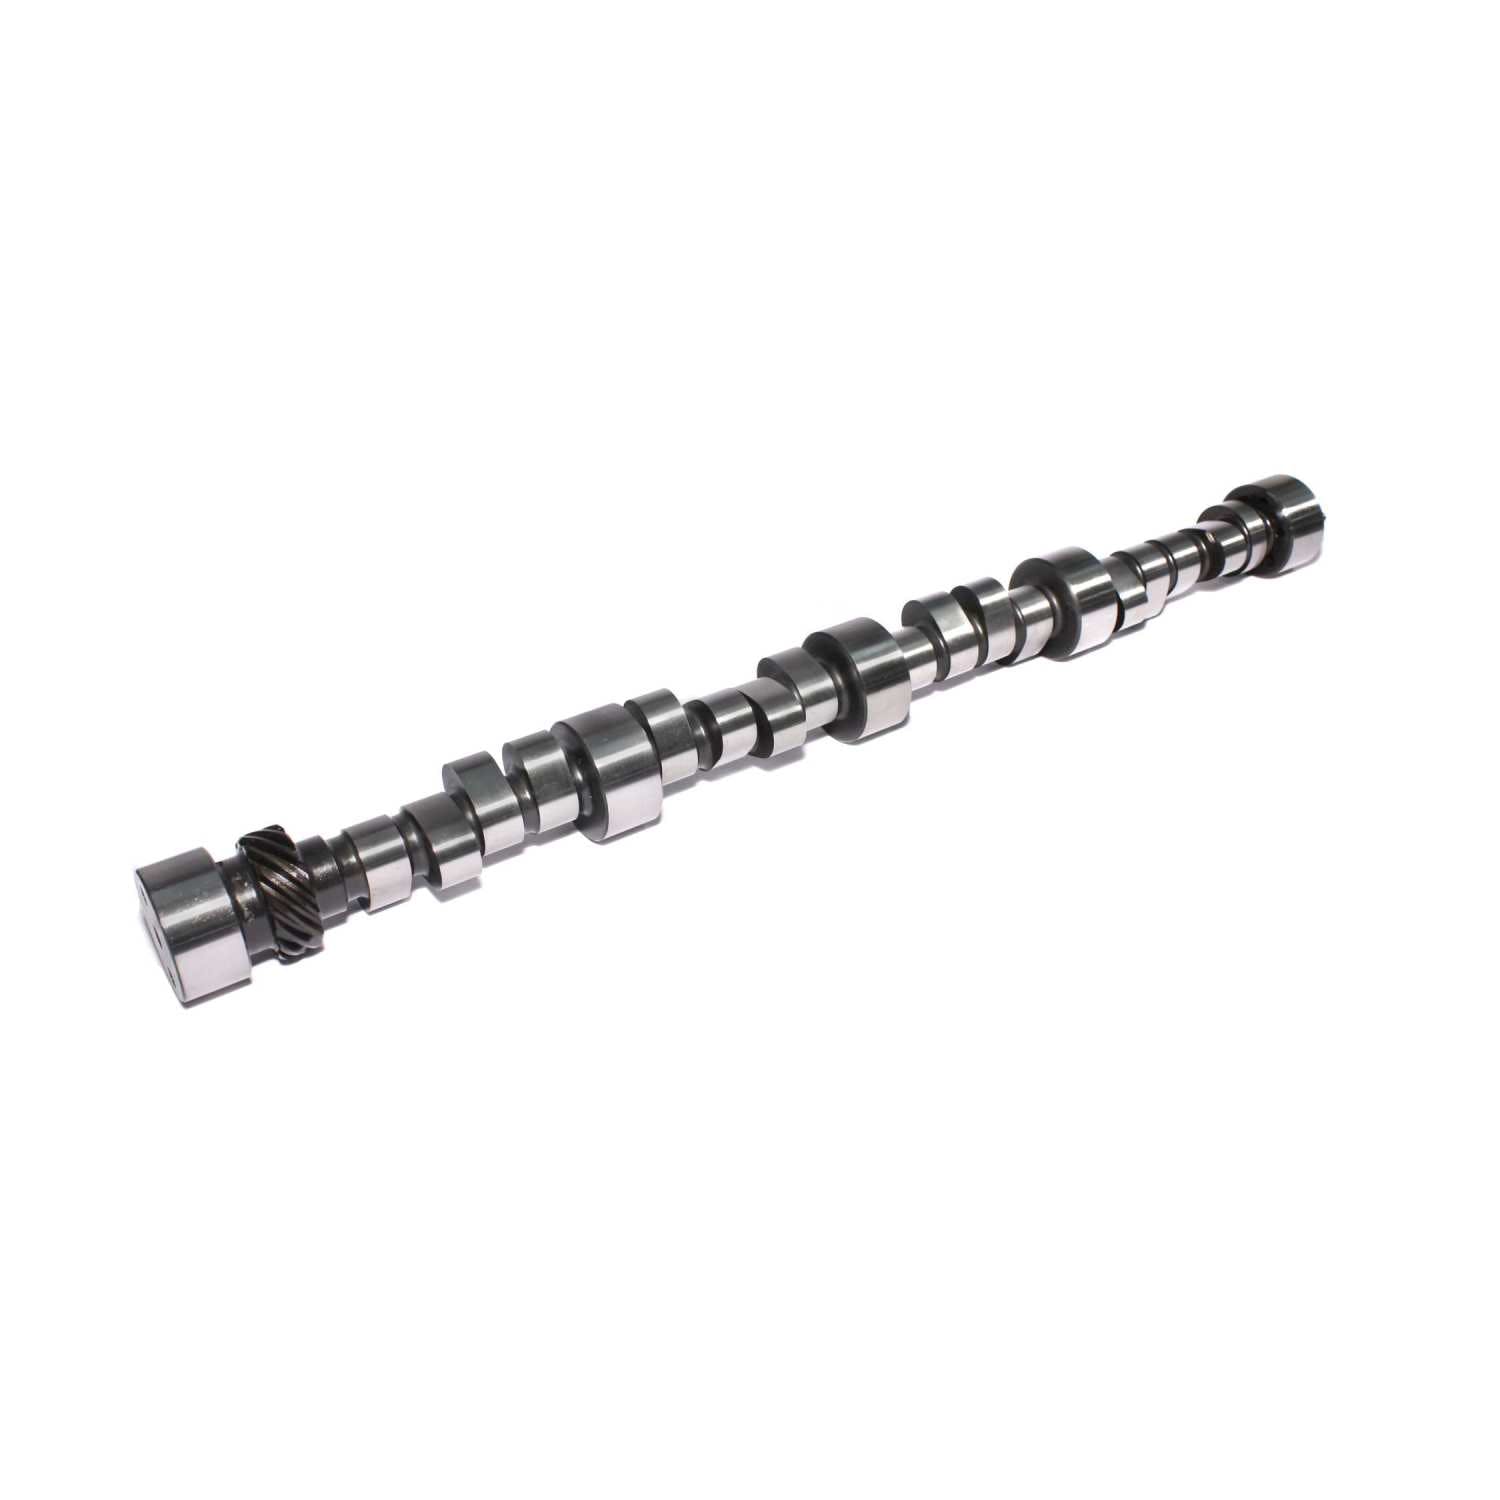 Competition Cams 11-743-9 Drag Race Xtreme RX Camshaft